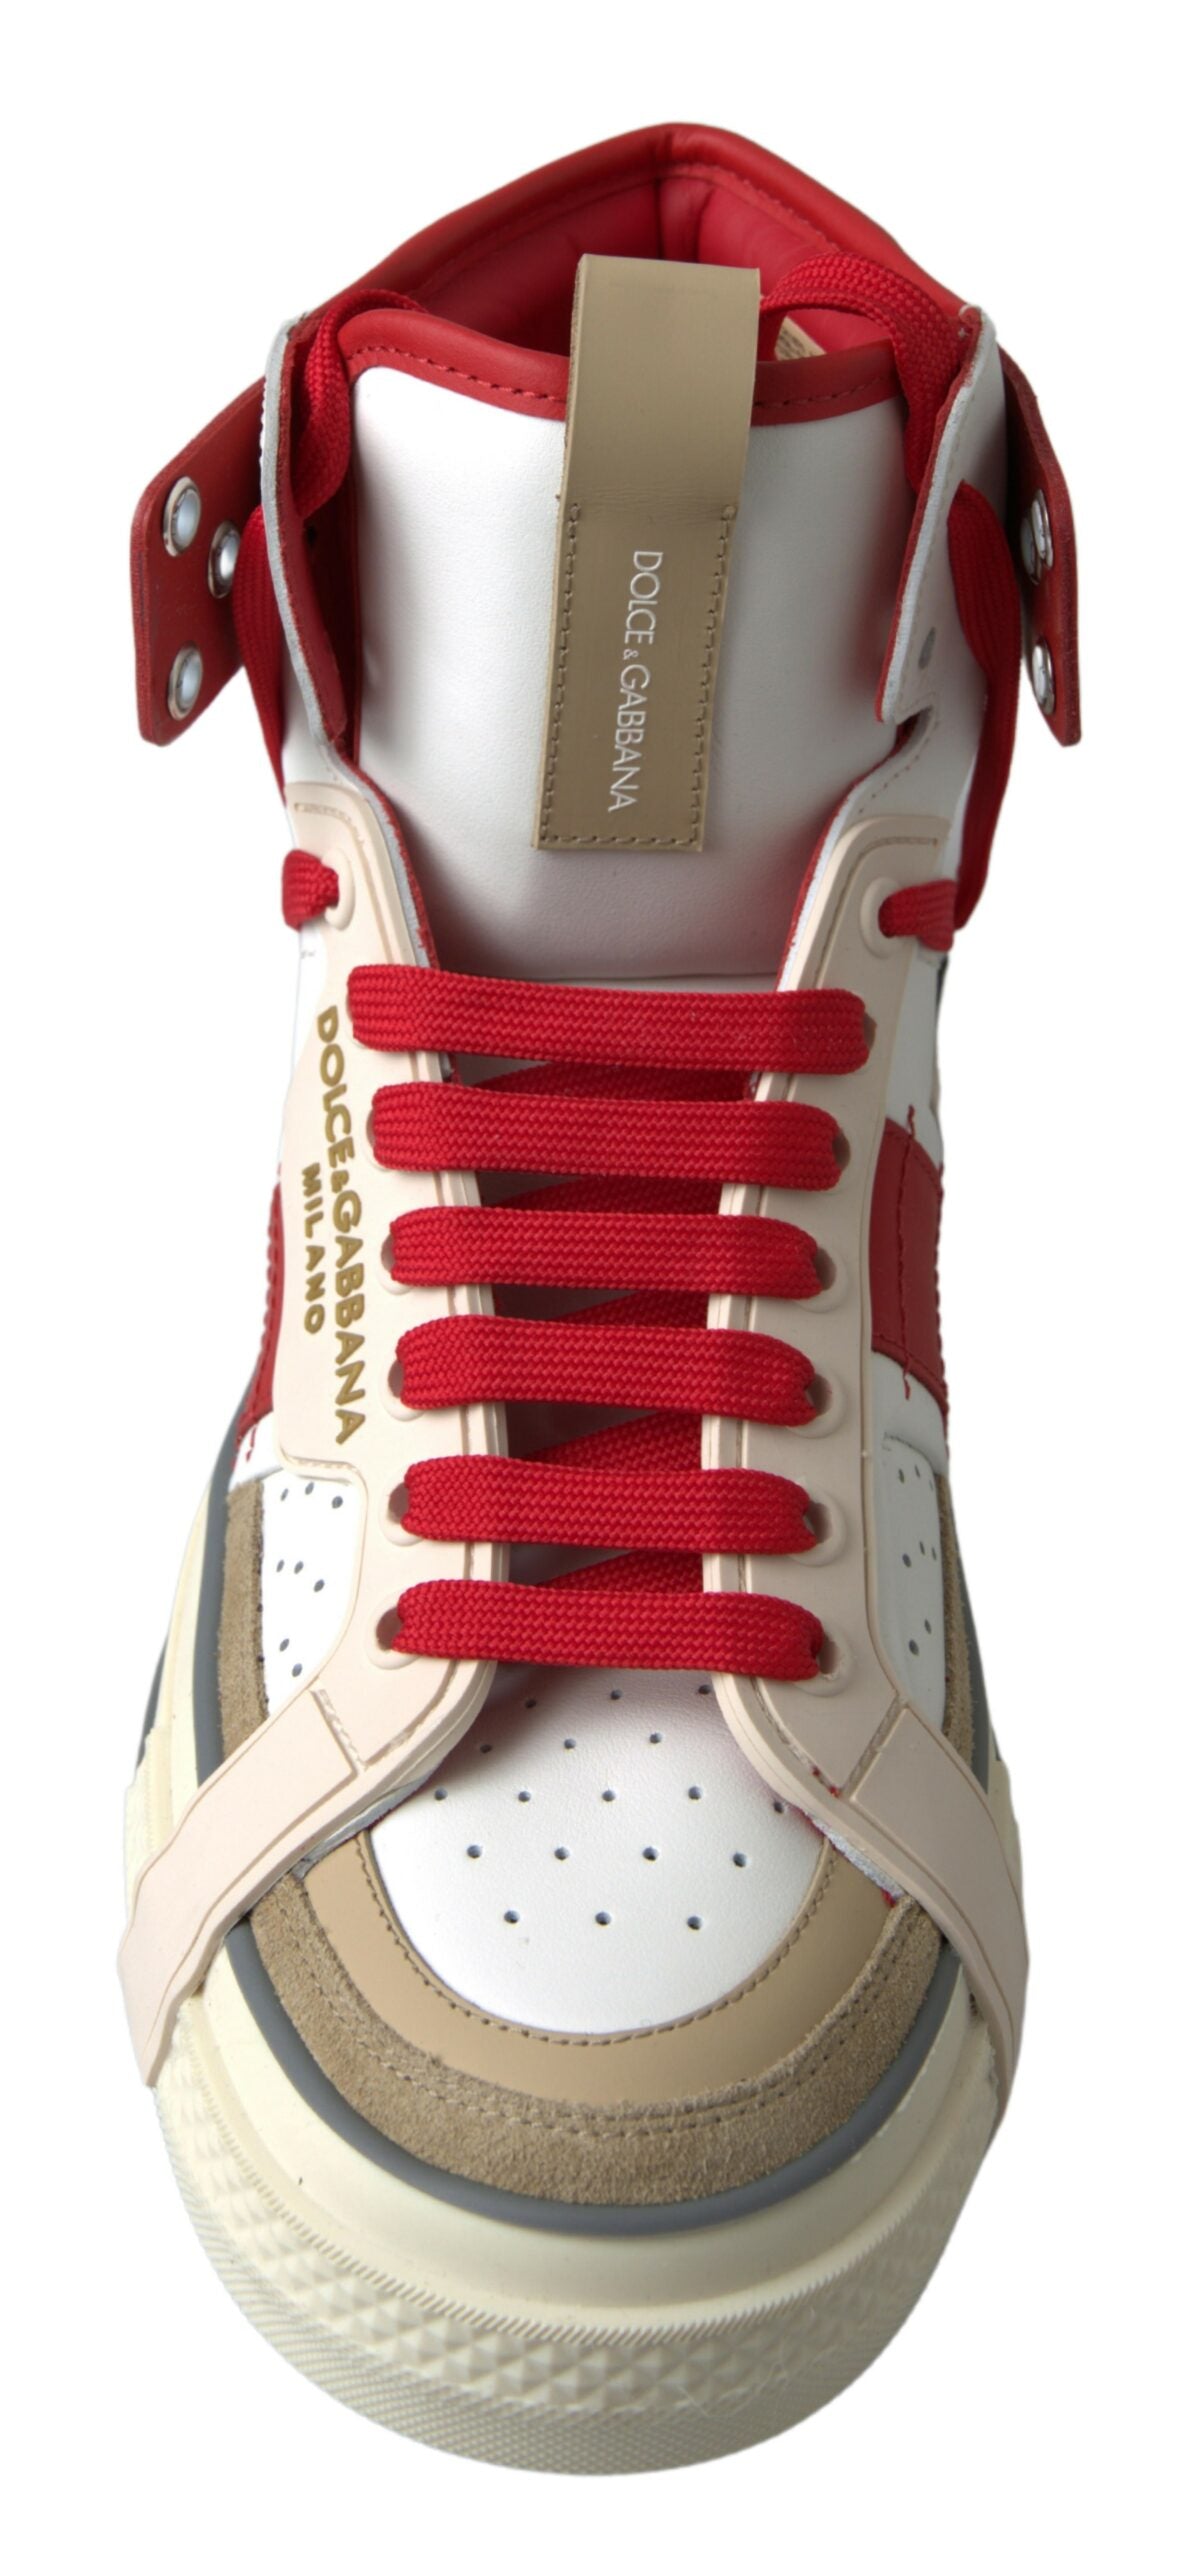 Dolce & Gabbana Multicolor High-Top Leather Sneakers